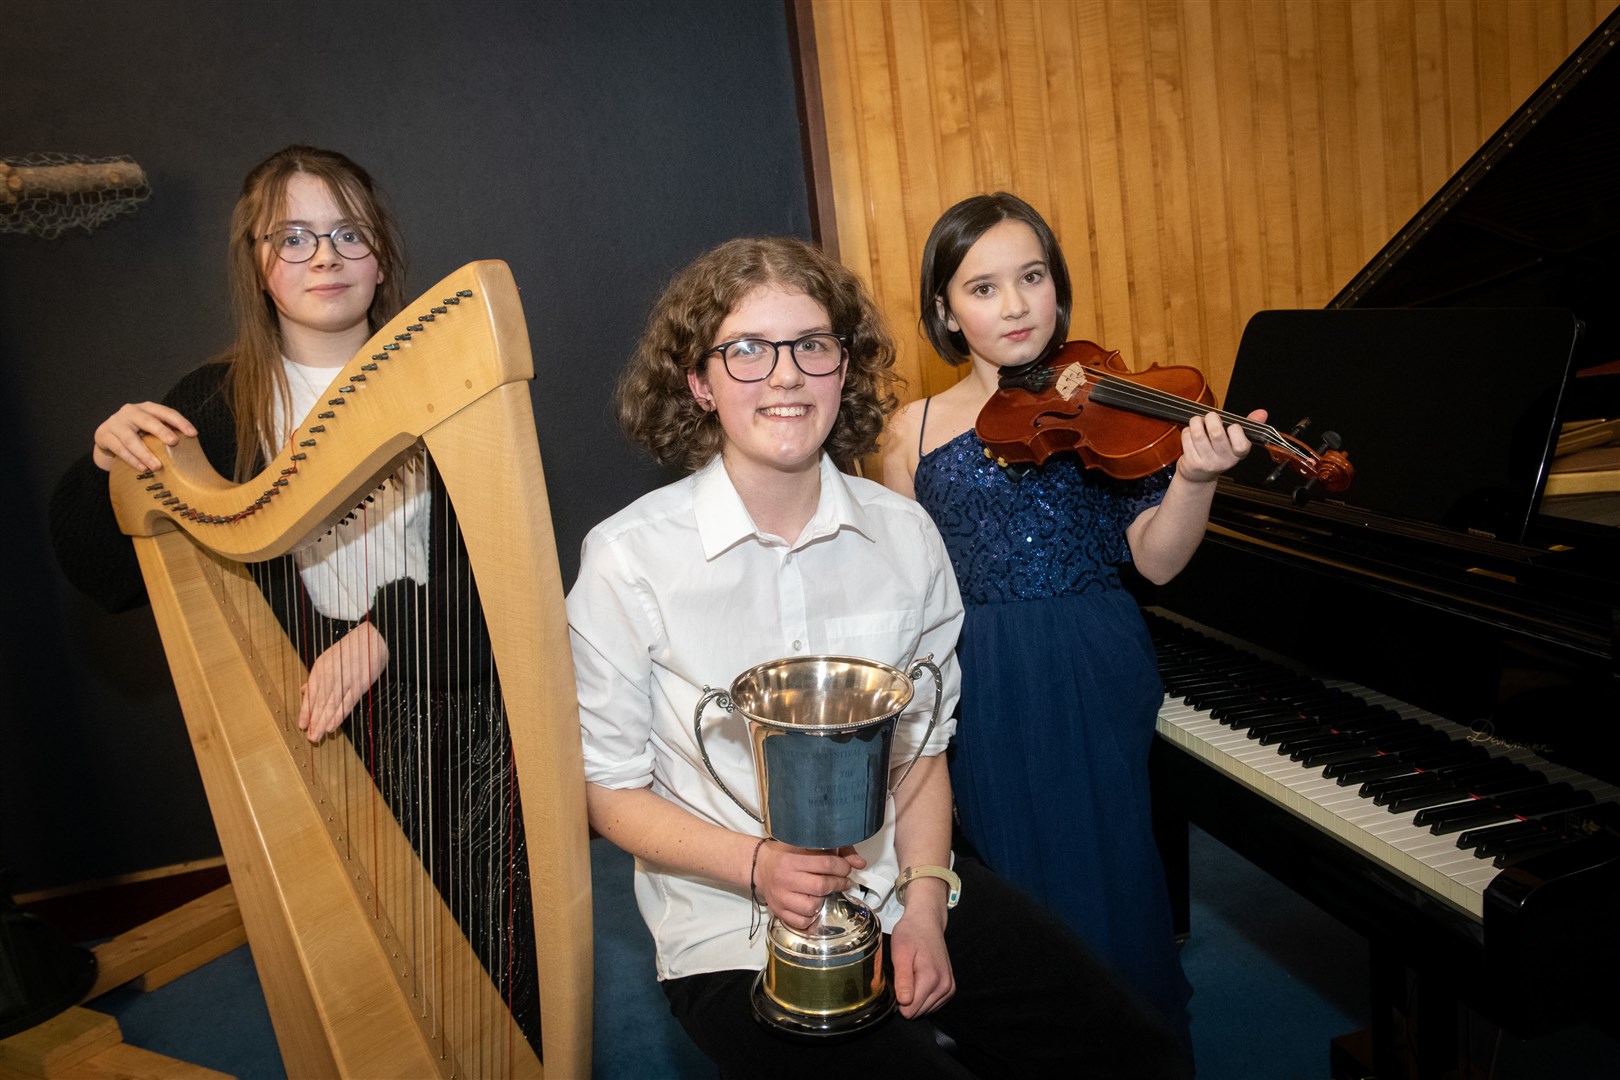 At Saturday’s Curtis Craig competition: Isabelle Bremner (Inverness Royal Academy), Angela Nankivell (Dingwall Academy, winner) and Myfanwy Treacy Plain (Gordonstoun). Picture: Callum Mackay